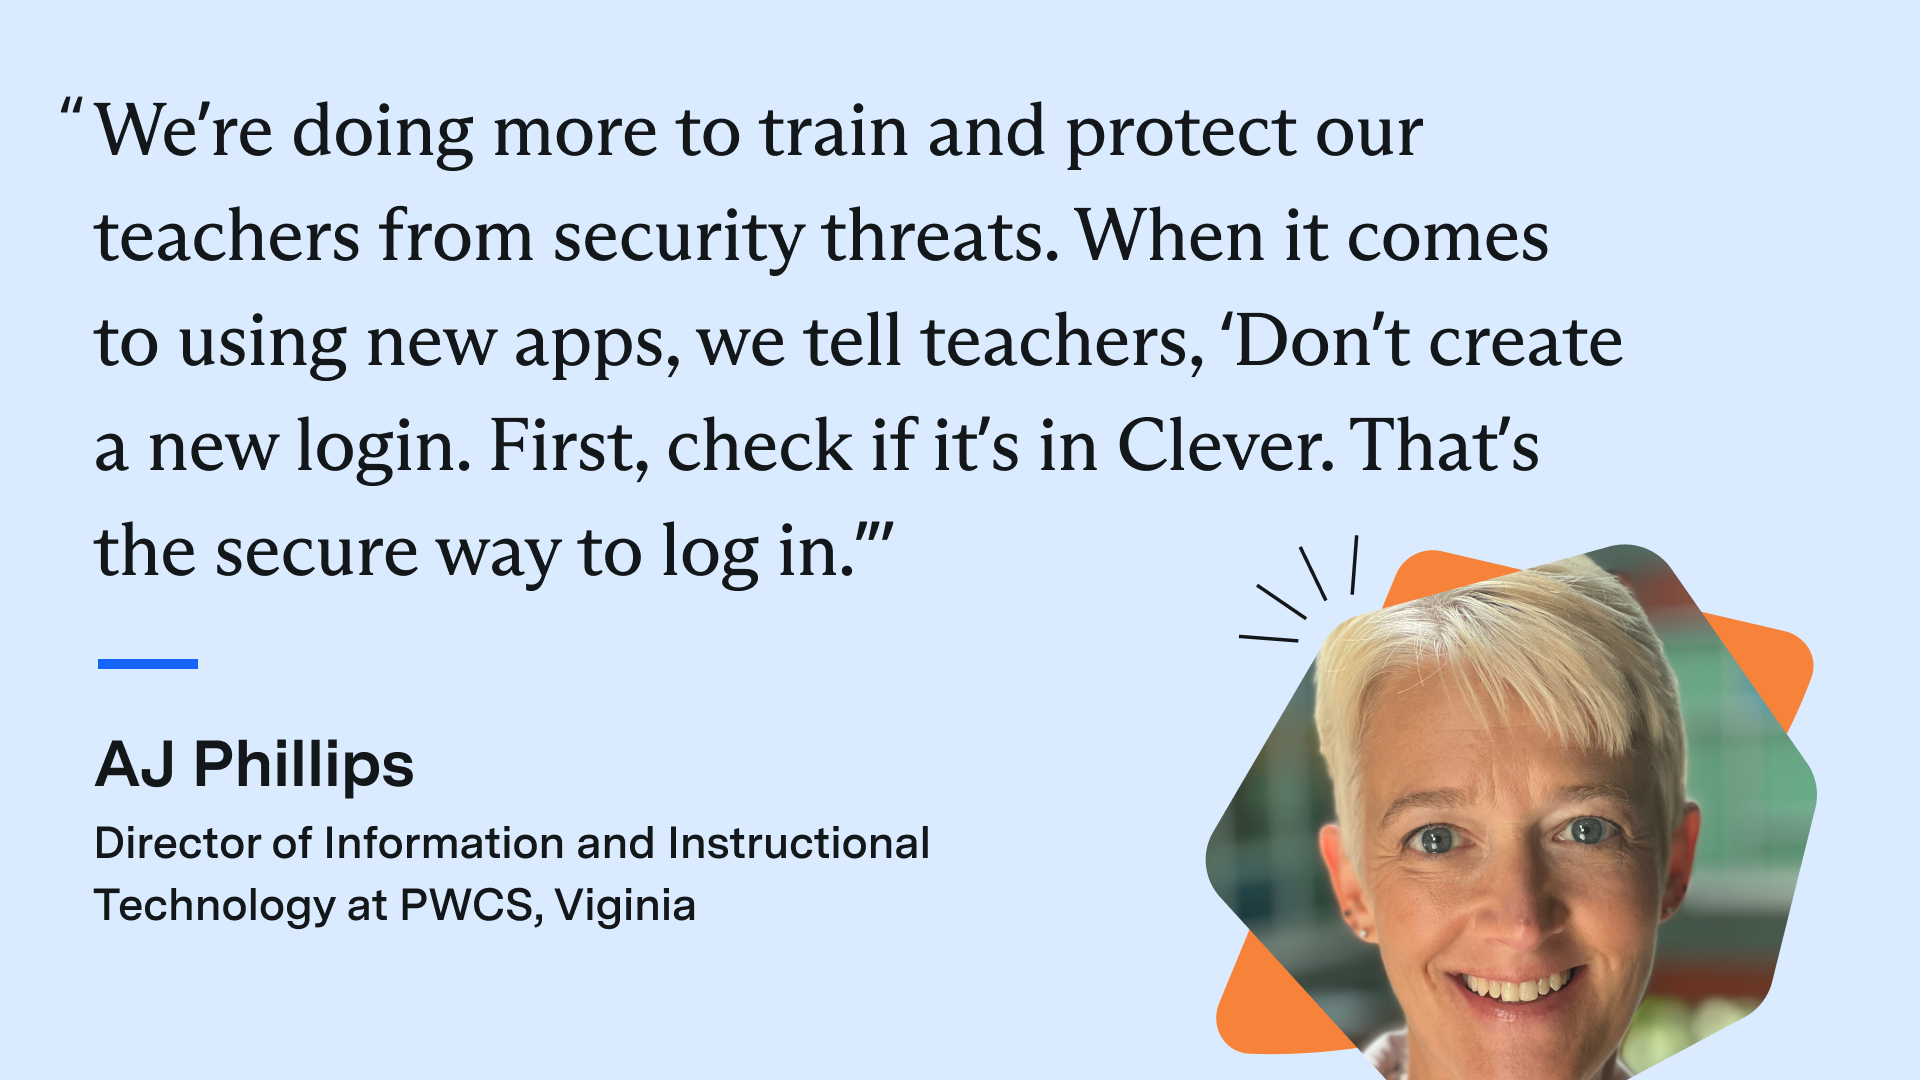 “We’re doing more to train and protect our teachers from security threats. When it comes to using new apps, we tell teachers, ‘Don’t create a new login. First, check if it’s in Clever. That’s the secure way to log in.’” - AJ Phillips, Director of Information and Instructional Technology at PWCS in Virginia